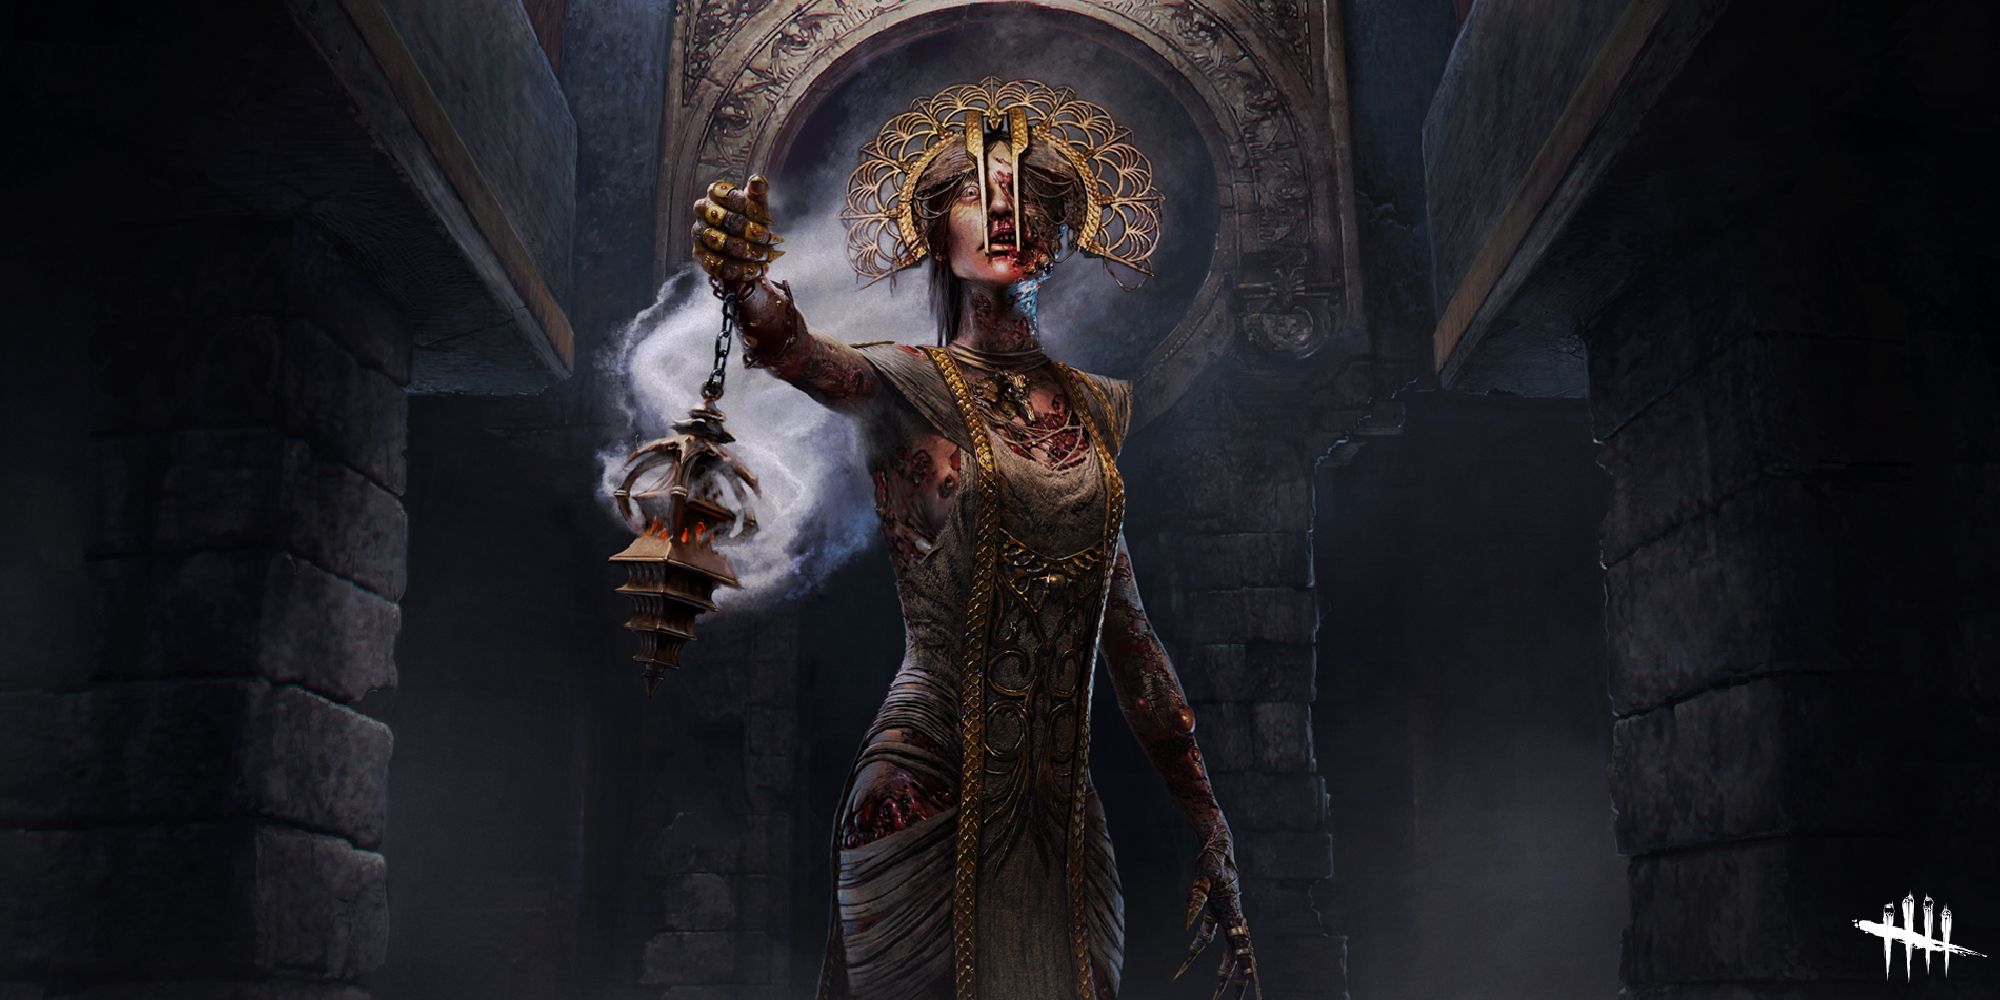 The Plague standing in a darkened temple, holding her weapon as she looks down at the viewer